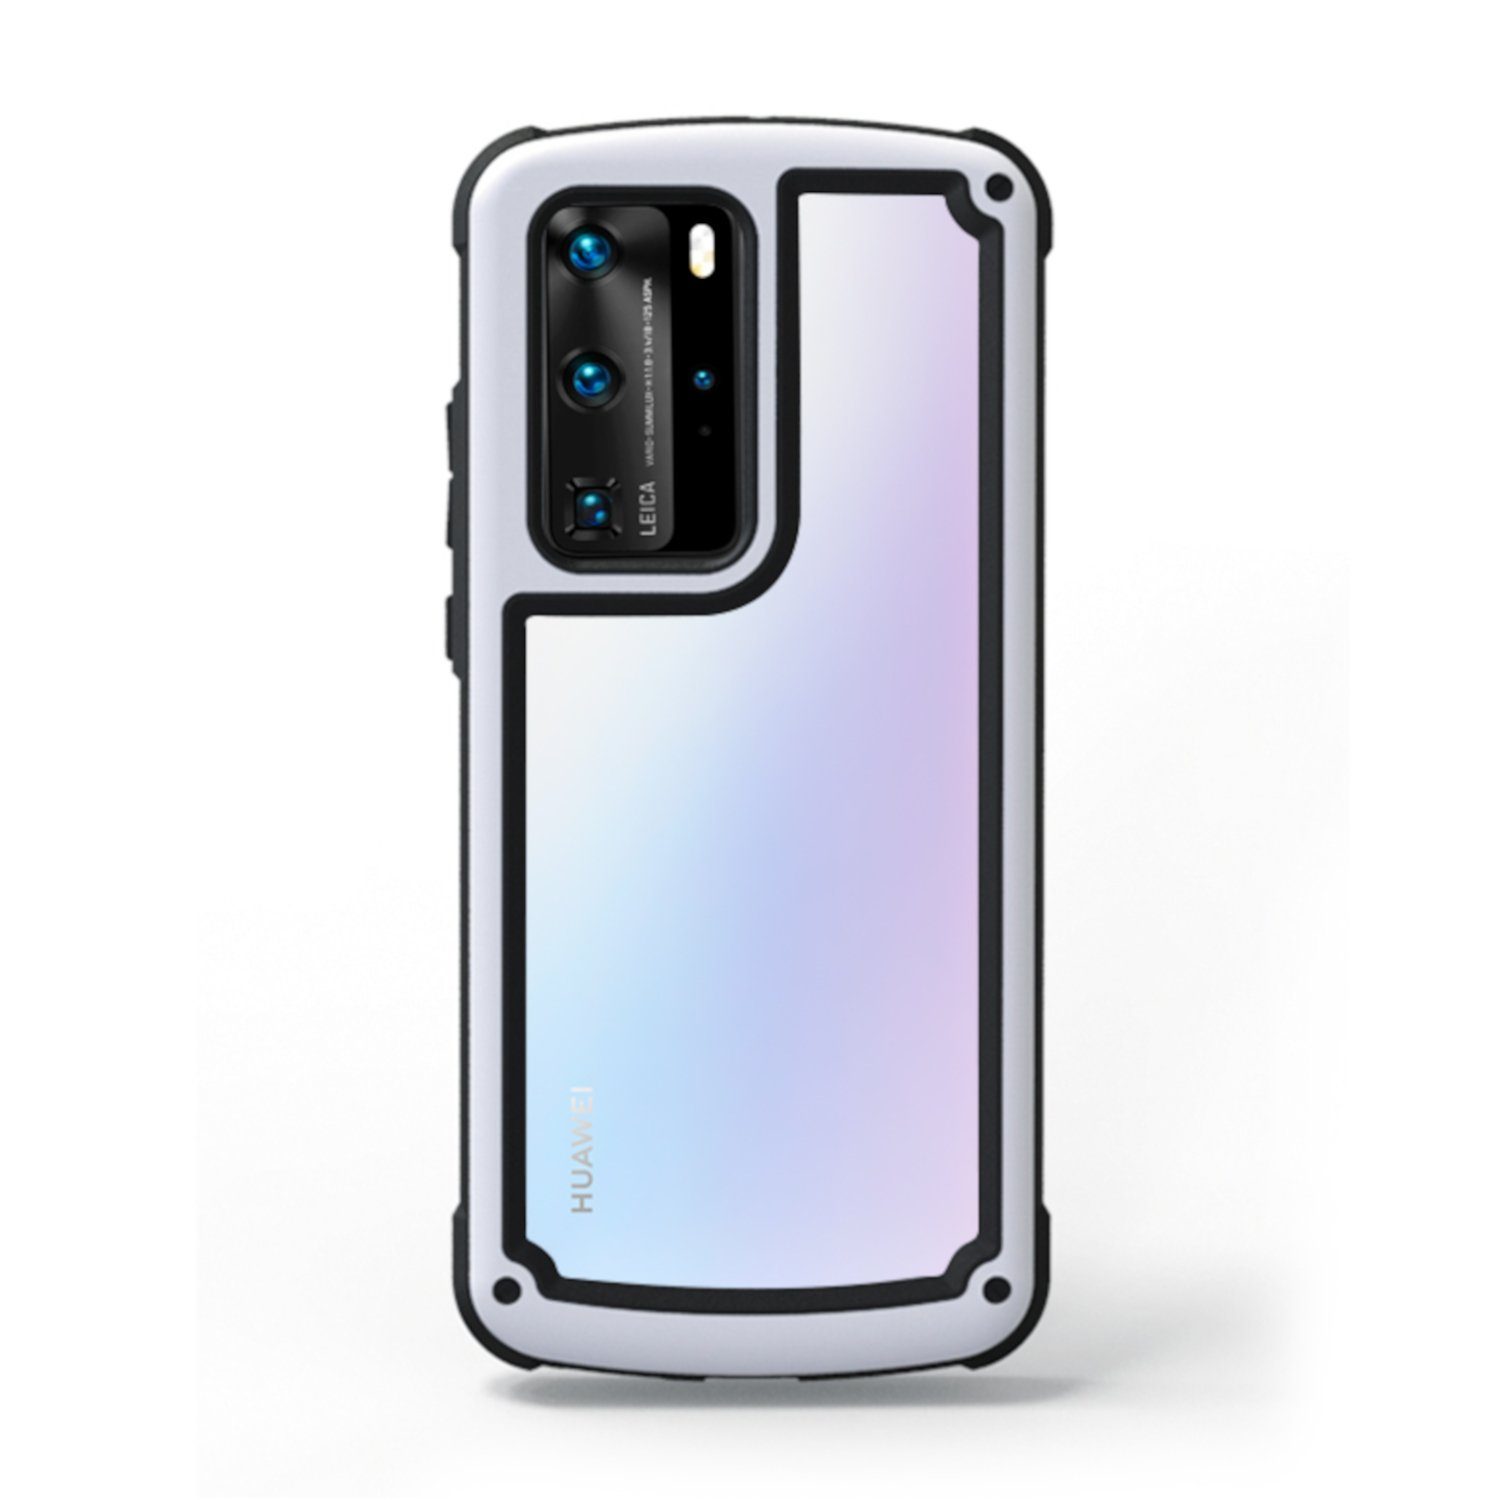 ROOT CO. Gravity Shock Resist Case for Huawei P40 Pro, Matte White Default ROOT CO. 